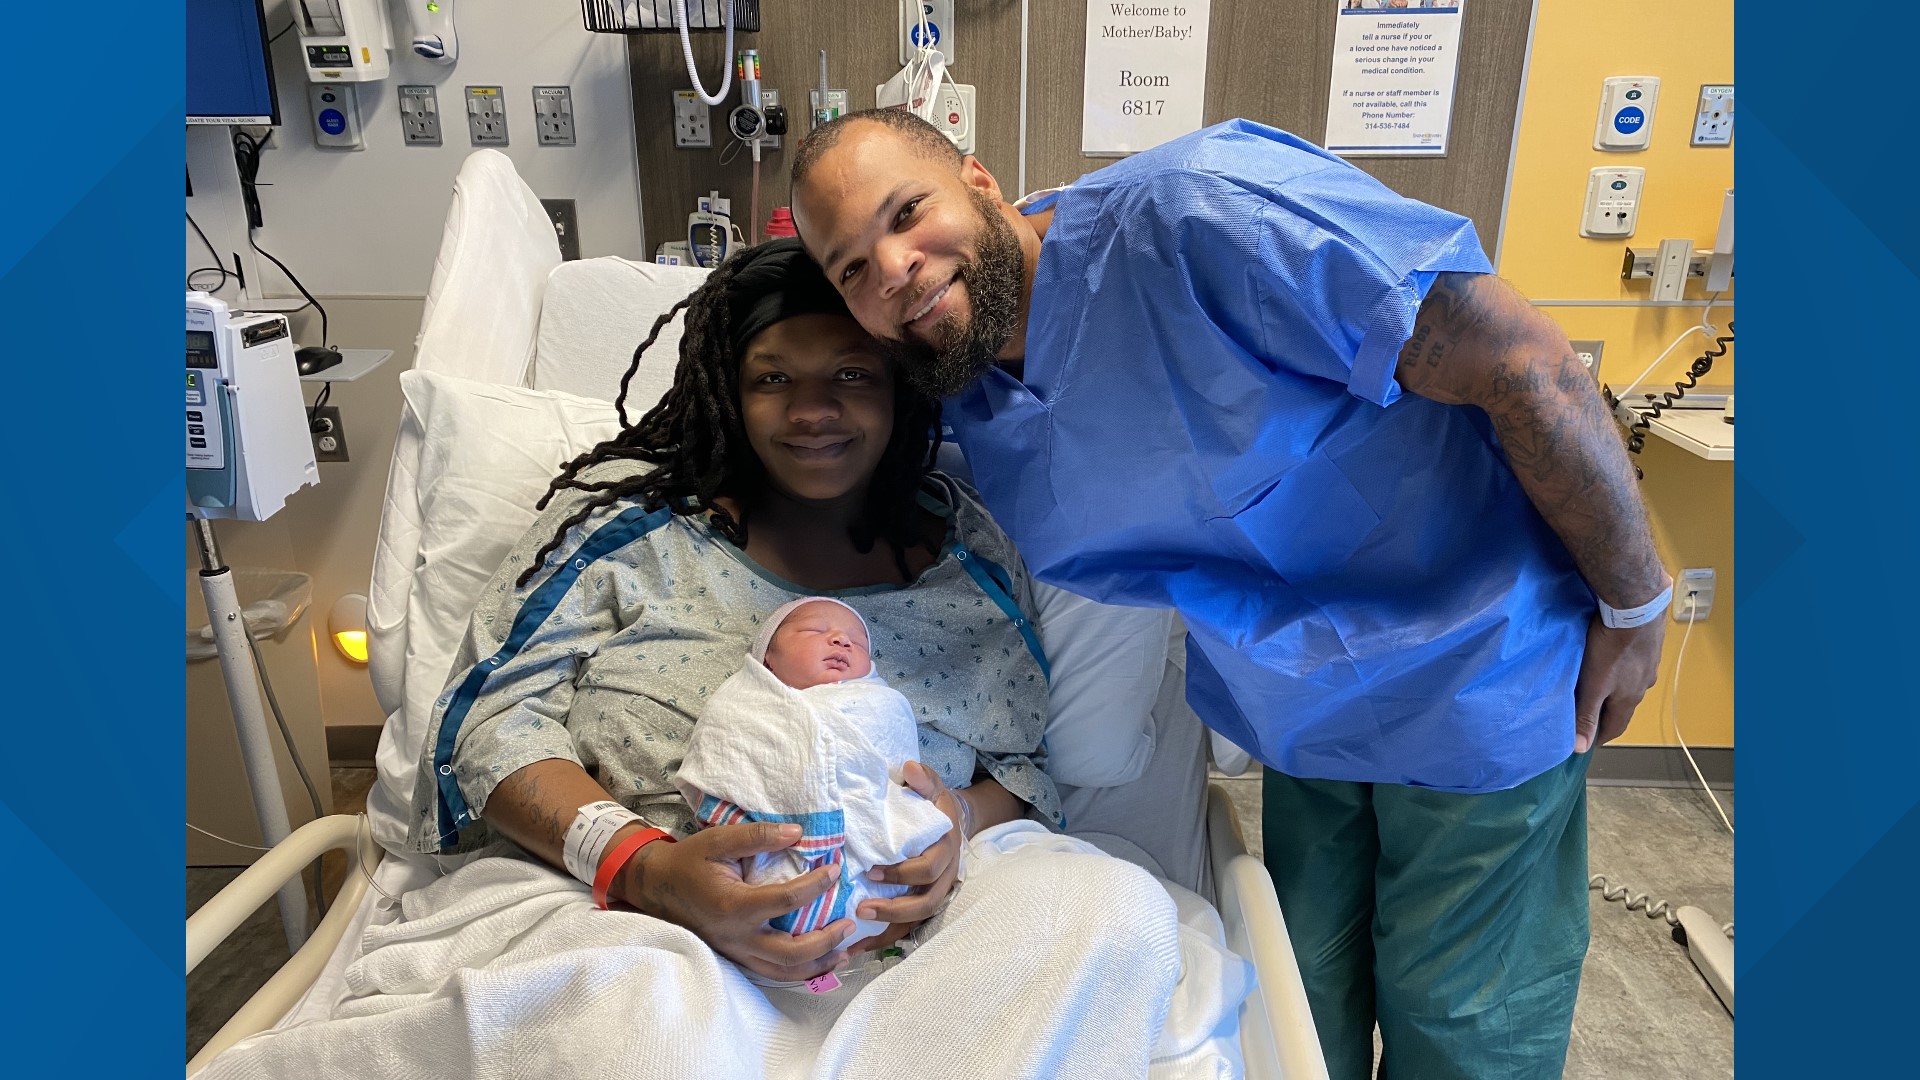 1st baby born in St. Louis on New Year's Day